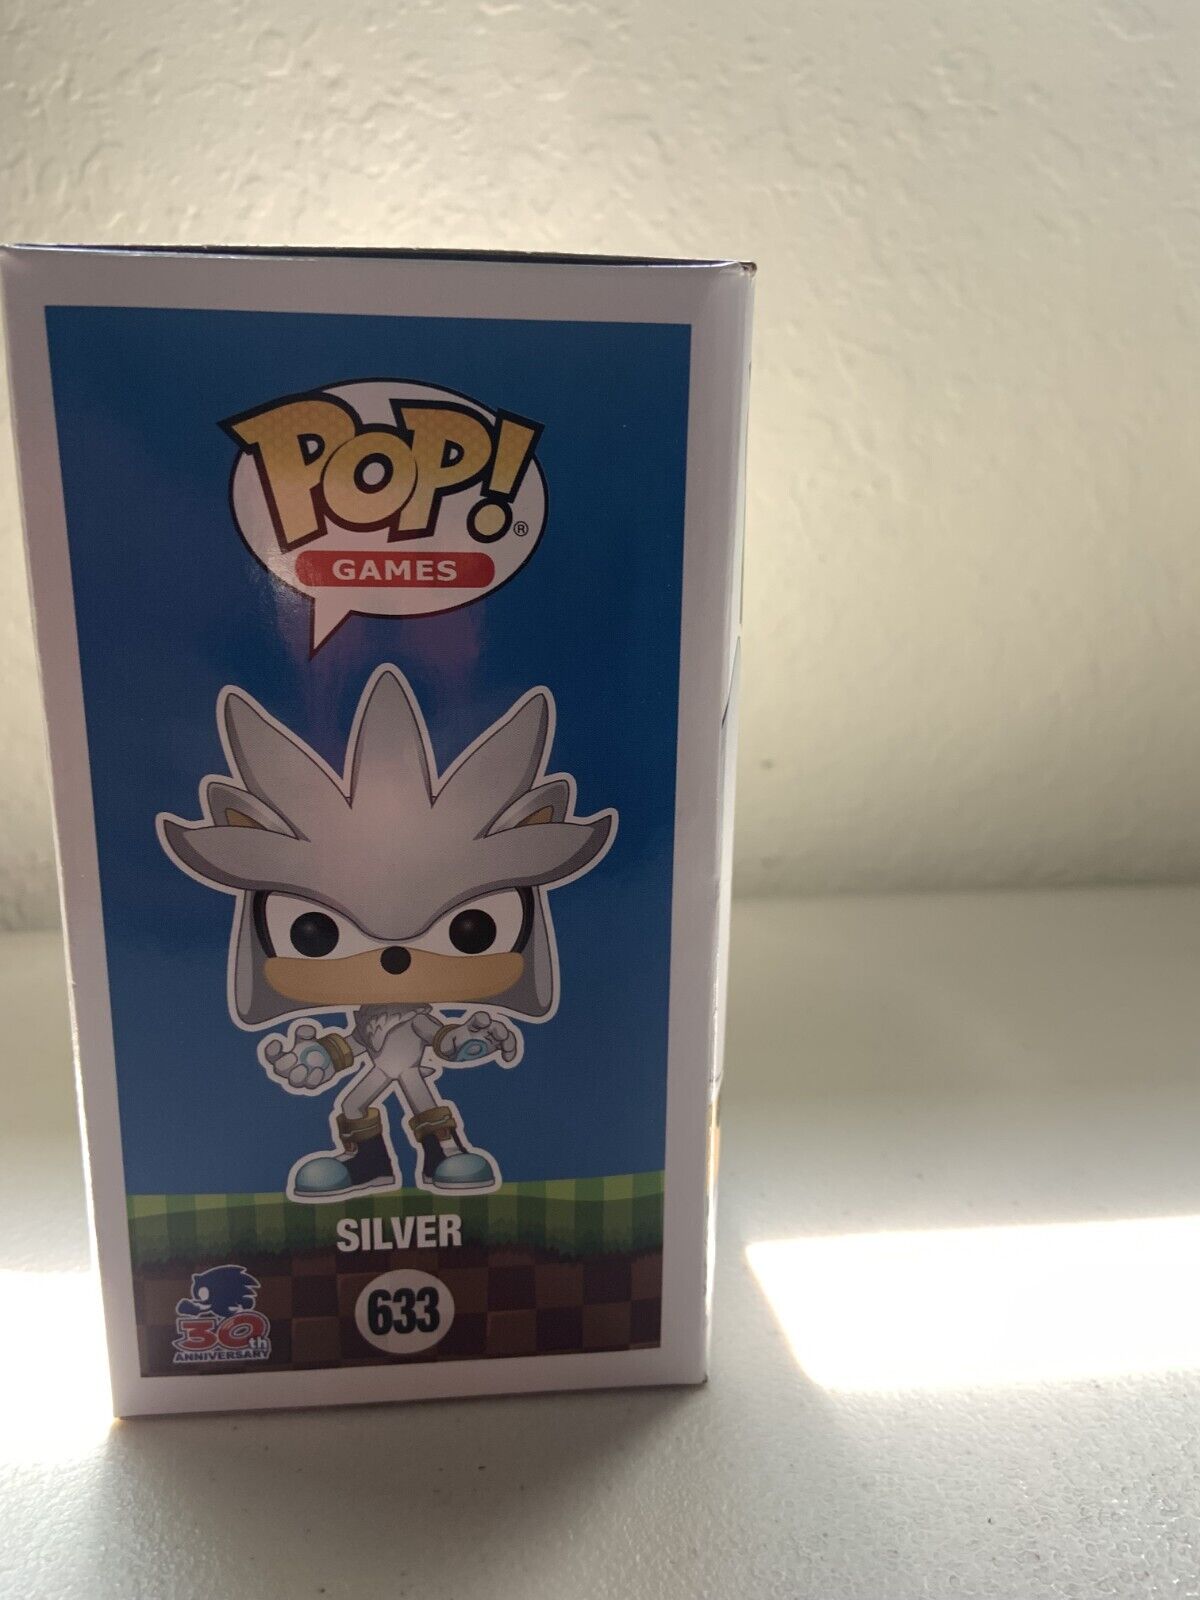 Funko POP! Games: Sonic the Hedgehog SILVER Figure #633 w/ Protector